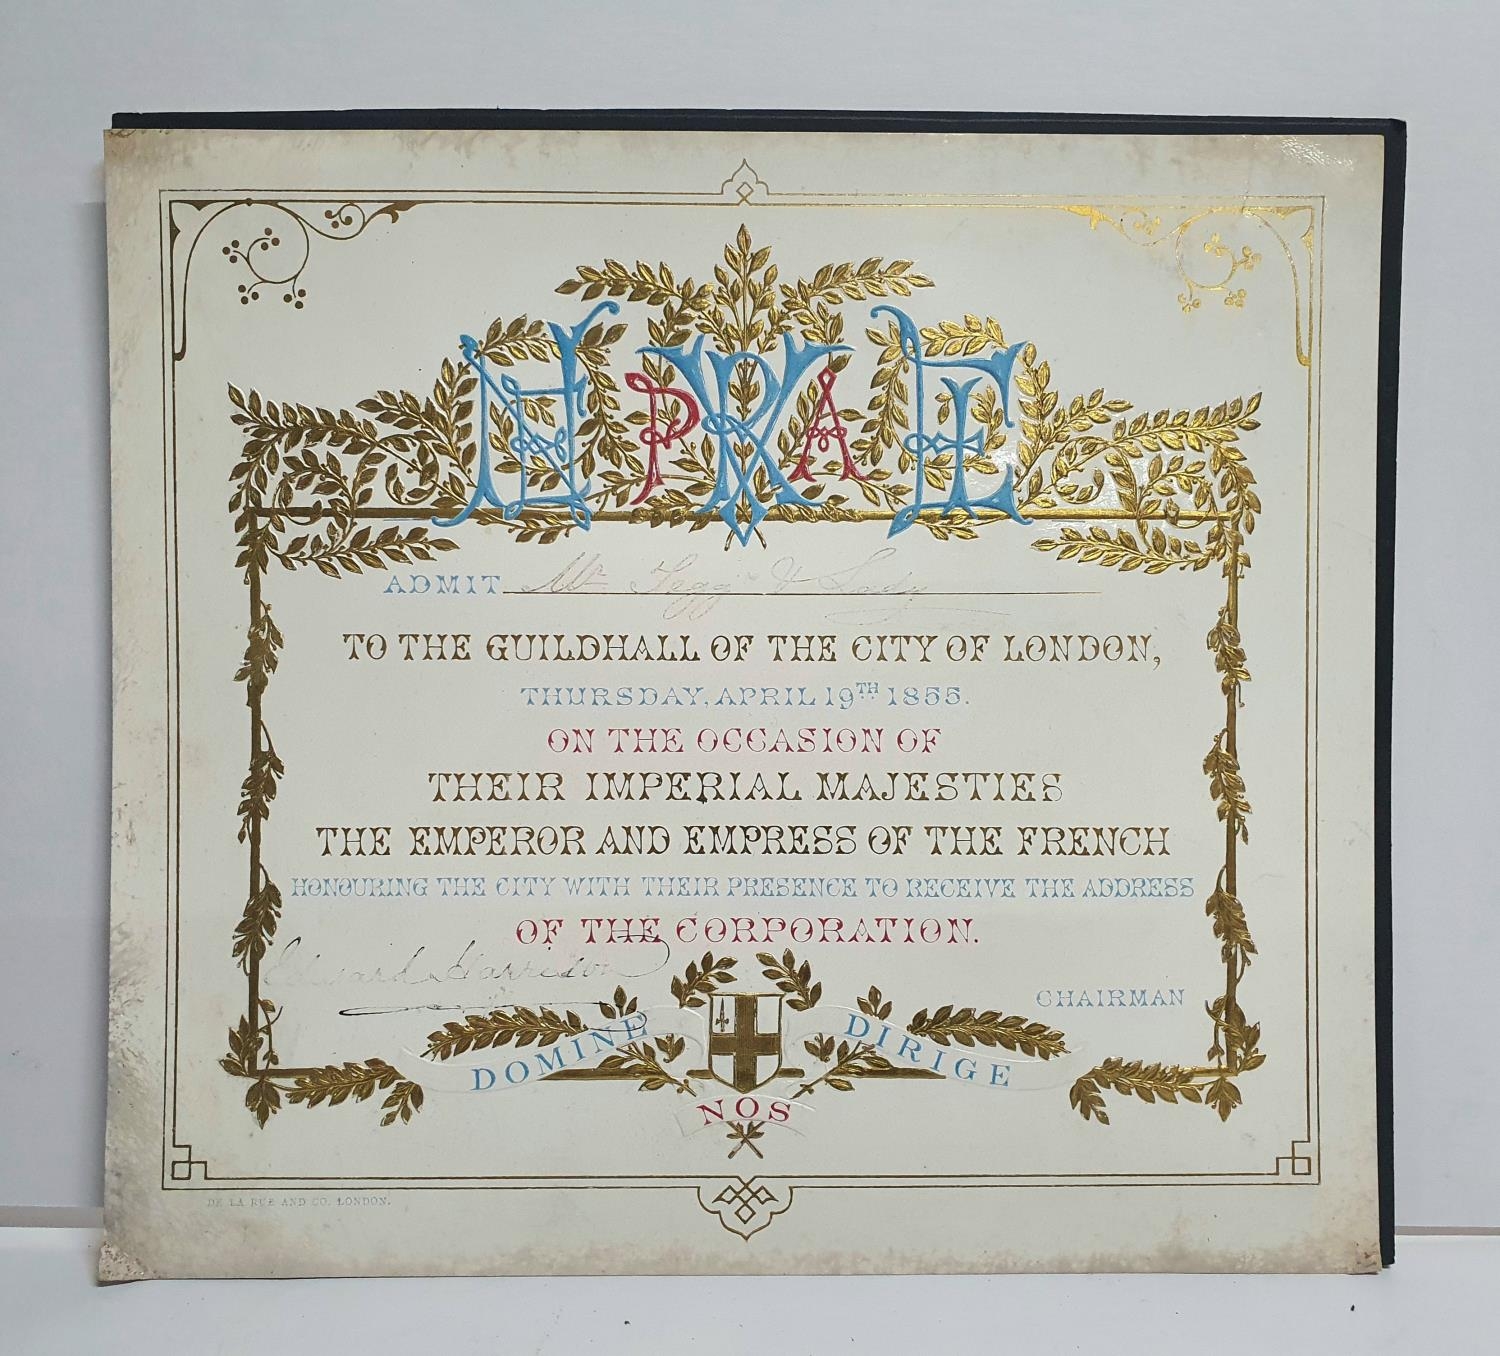 Embossed invitation card dated April 19th 1855 for the visit to the Guildhall of the city of